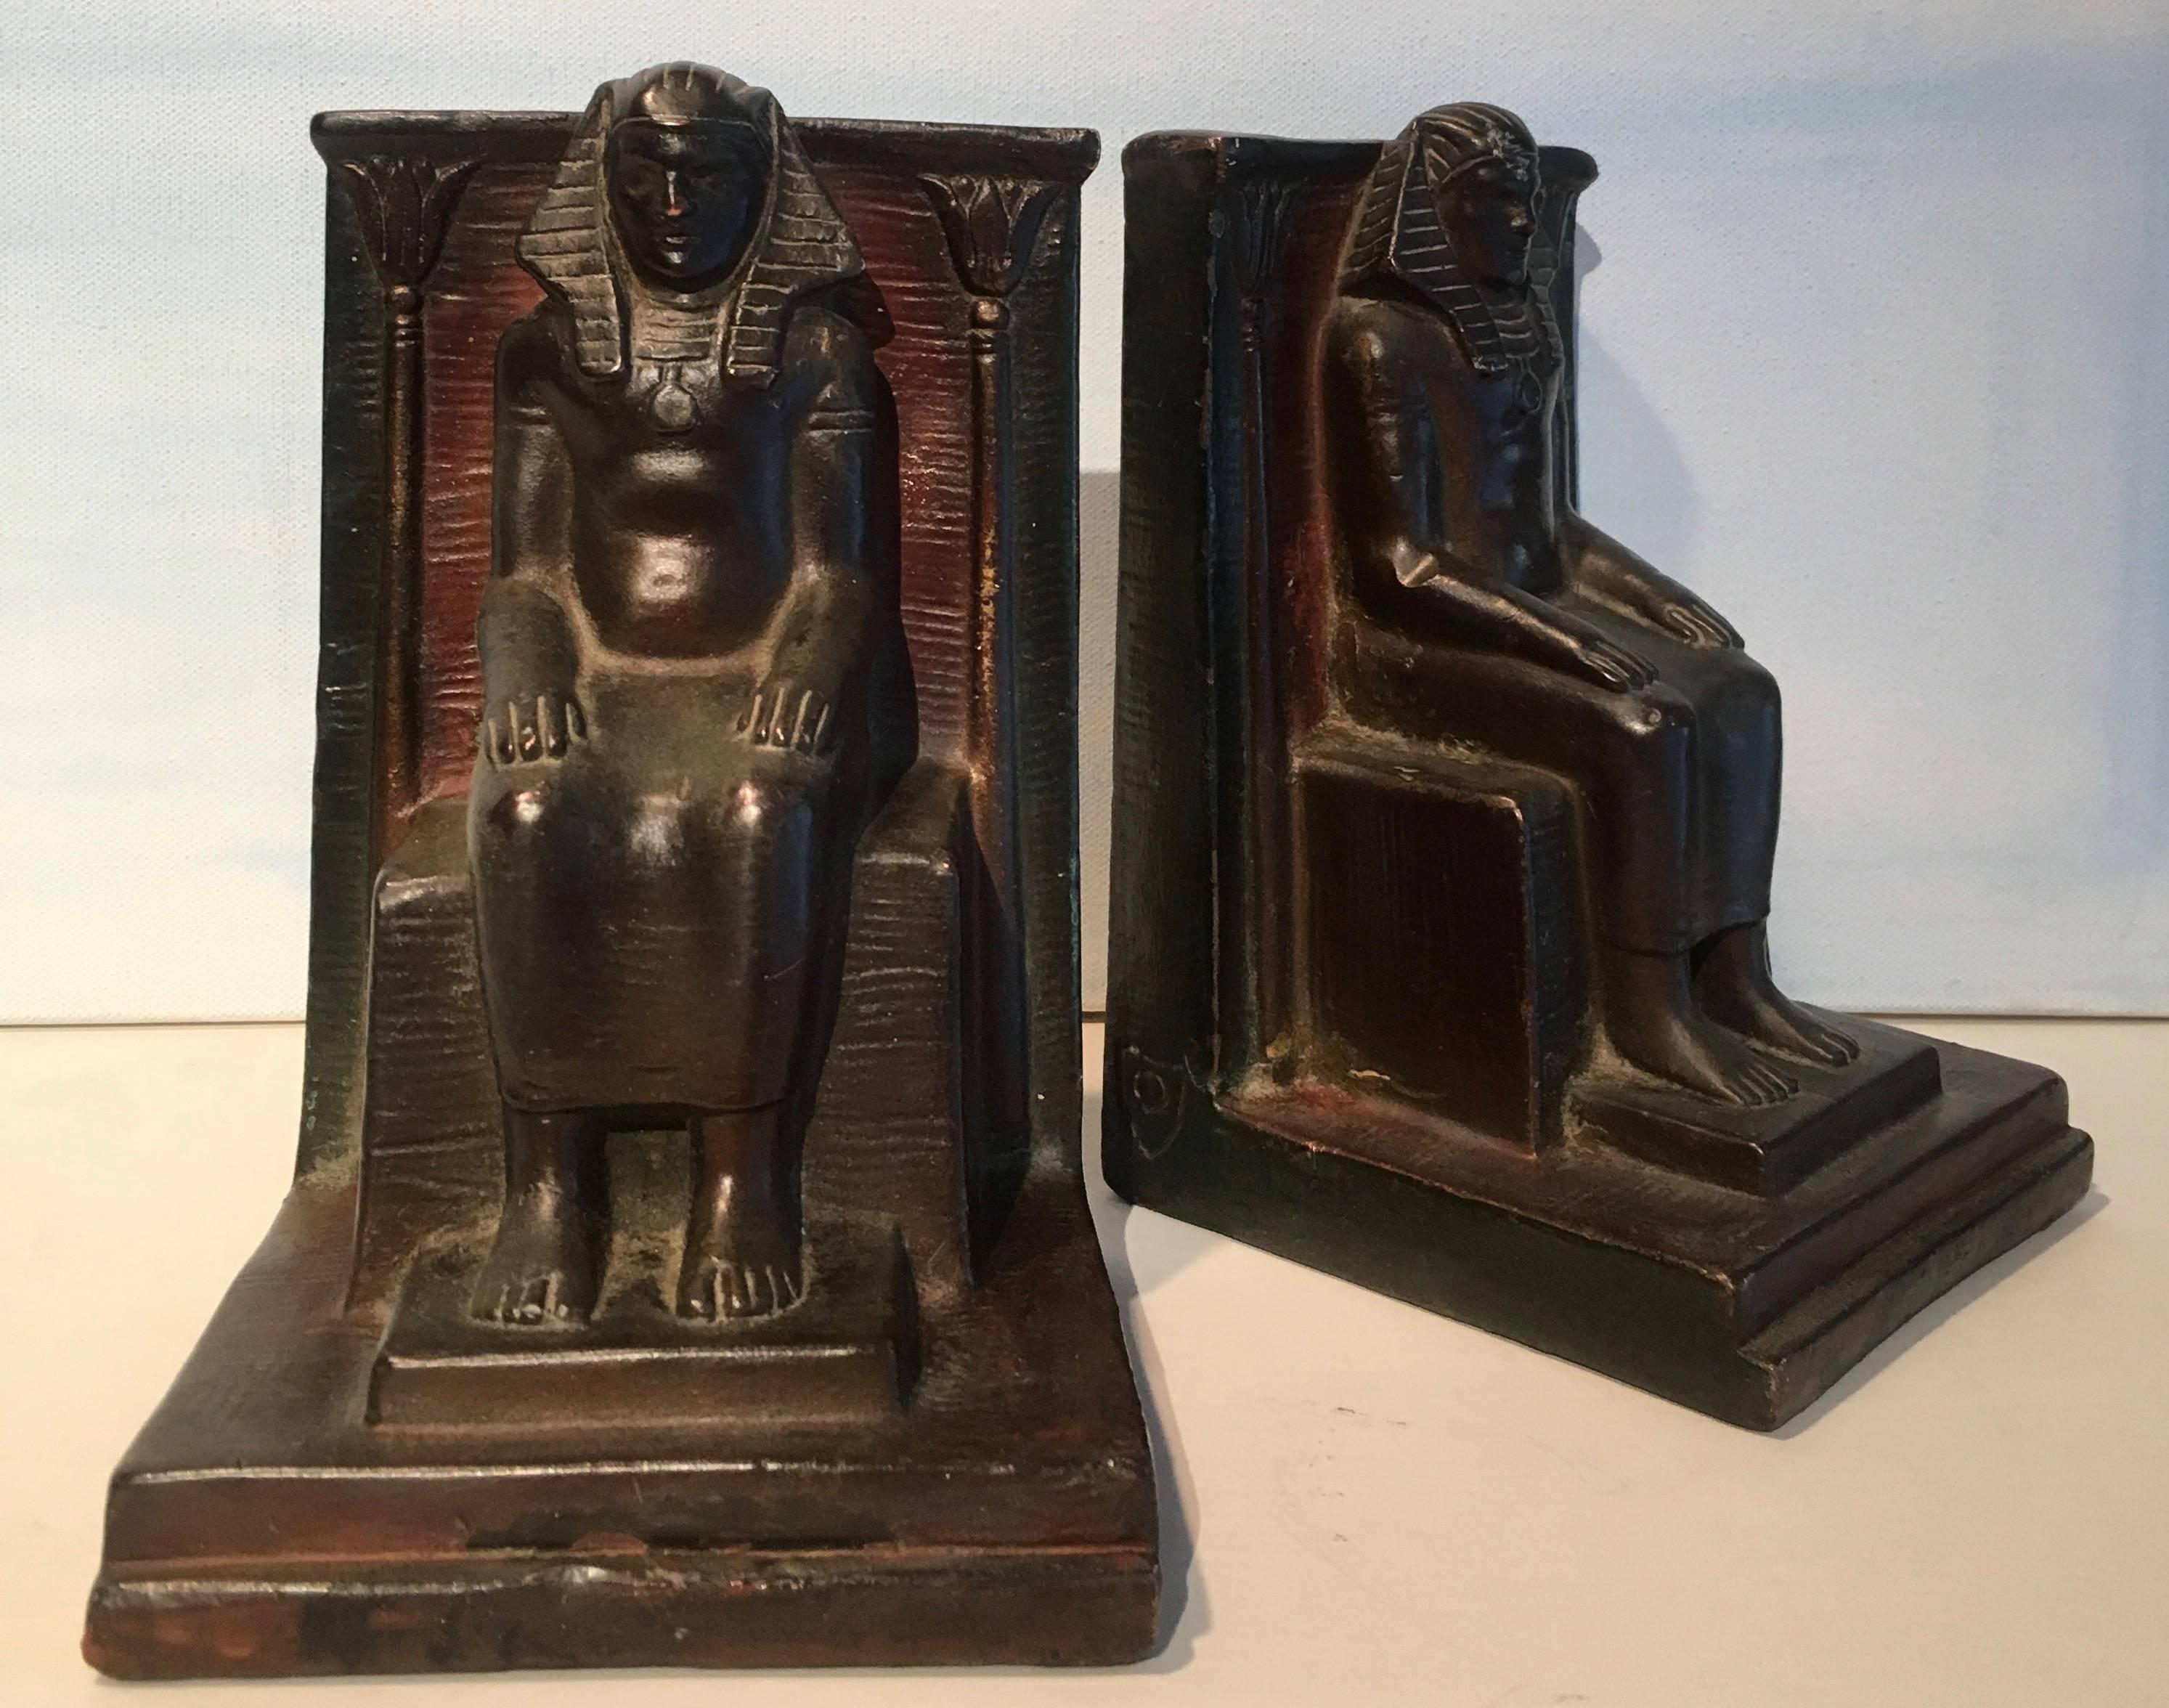 Beautiful vintage copper Pharaoh bookends, copper is formed over plaster form under. Believed to be memorabilia having to do with the King Tut exhibition and craze in the mid-1970s.